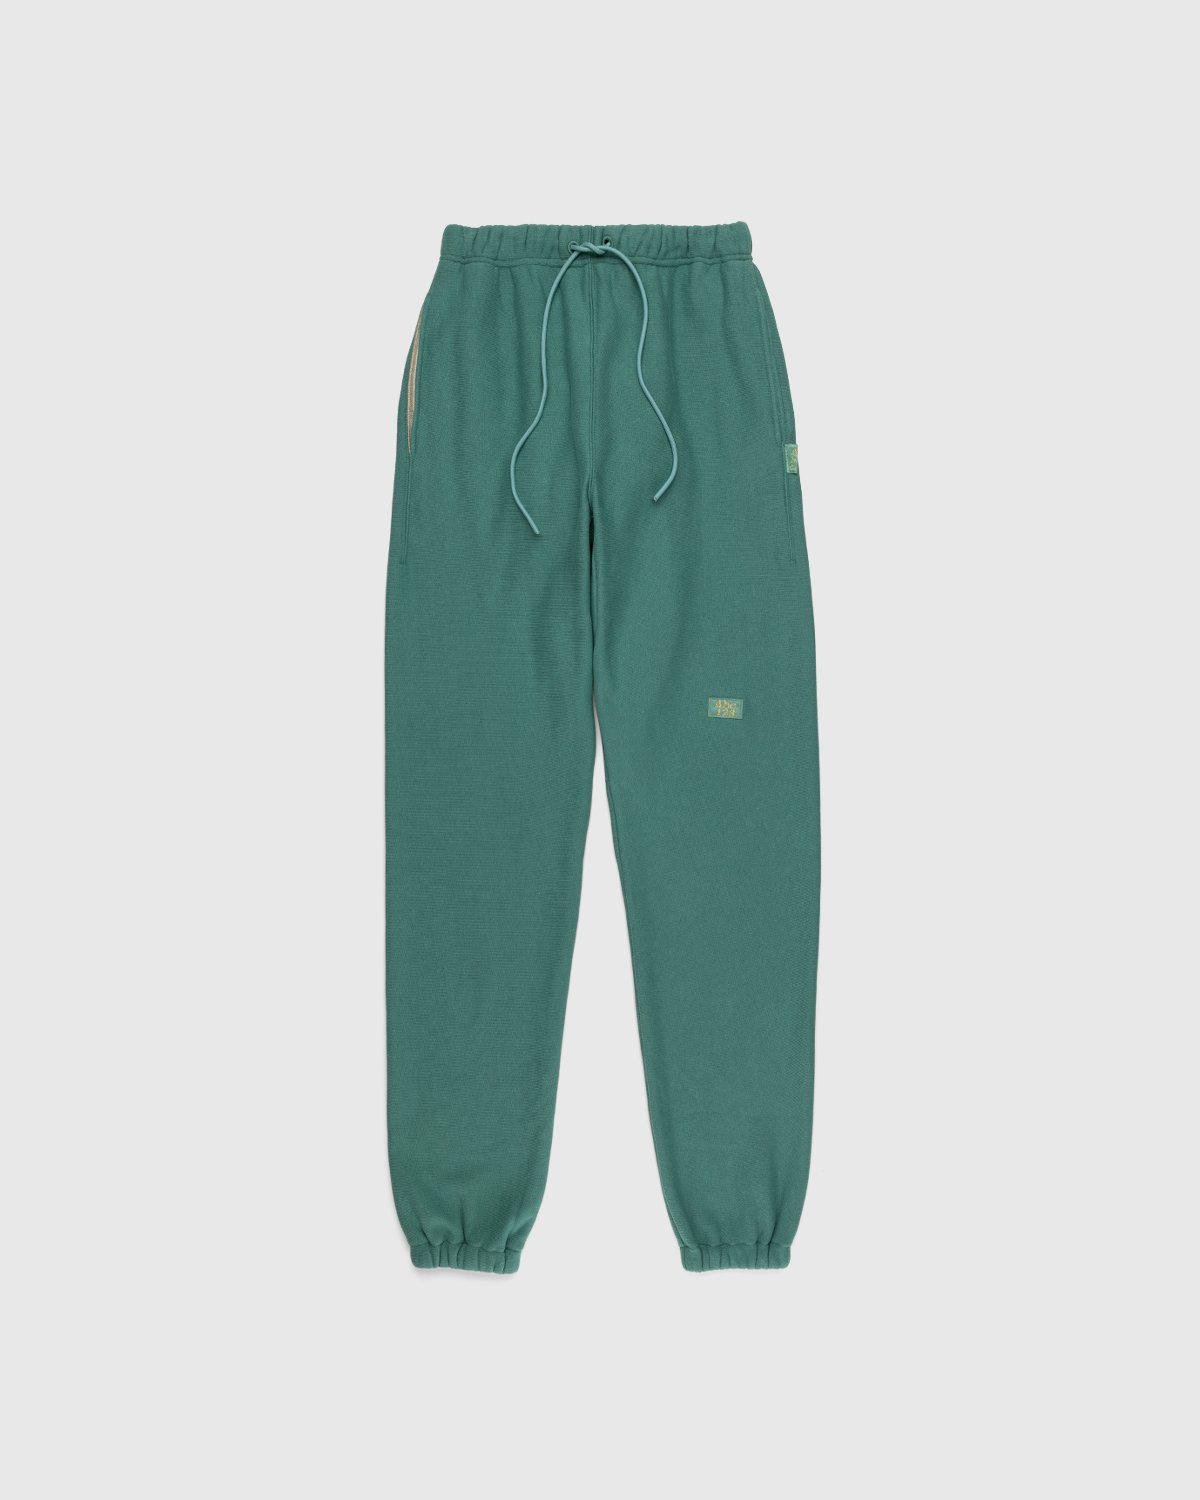 French Terry Sweatpants Apatite by ABC.